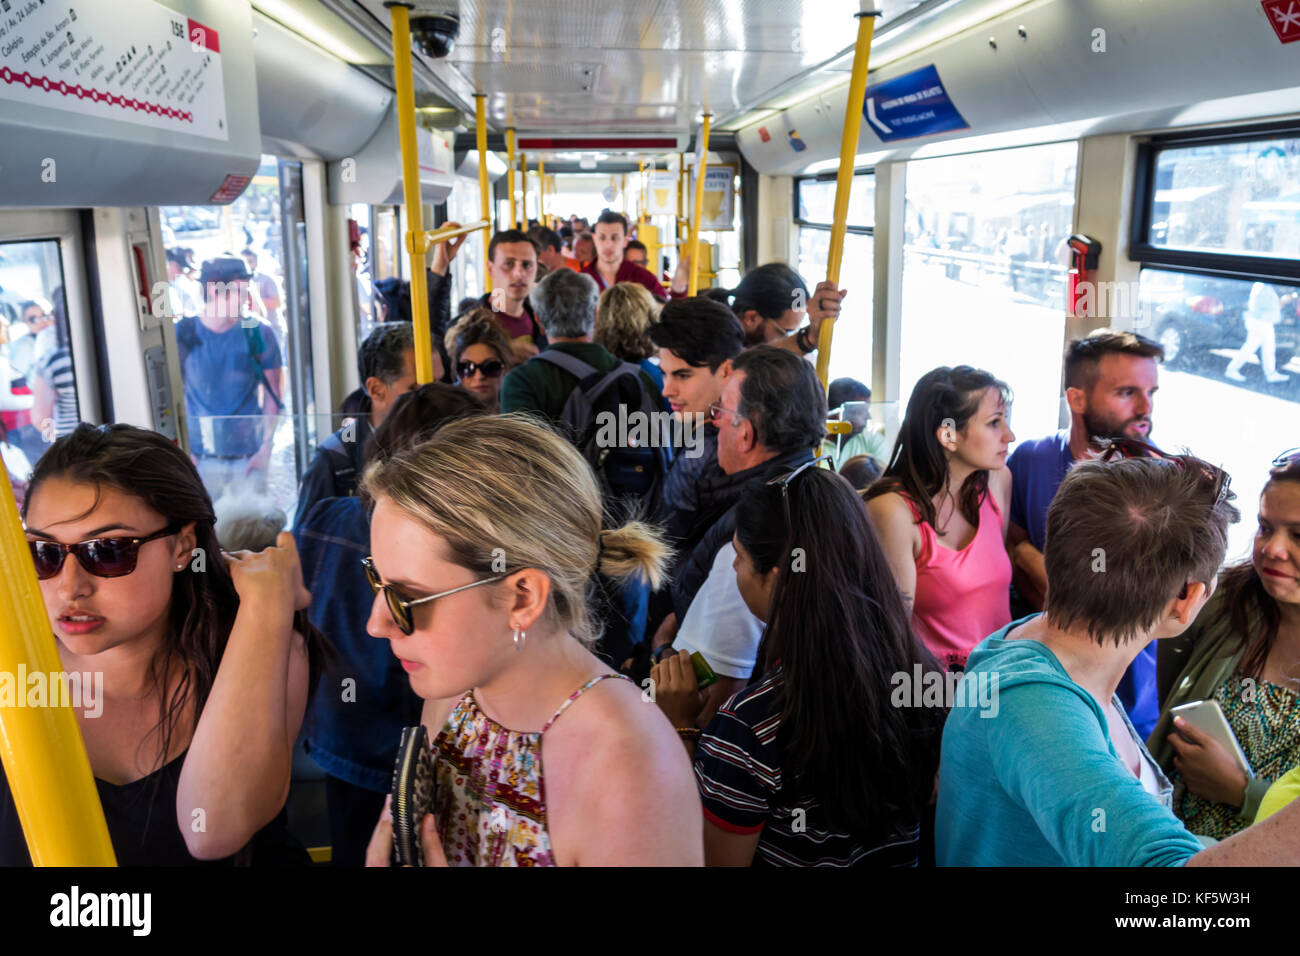 Lisbon Portugal,Carris,Tram 15,trolley,Belem Highway Route,crowded,passenger passengers rider riders,standing,Hispanic,immigrant immigrants,man men ma Stock Photo